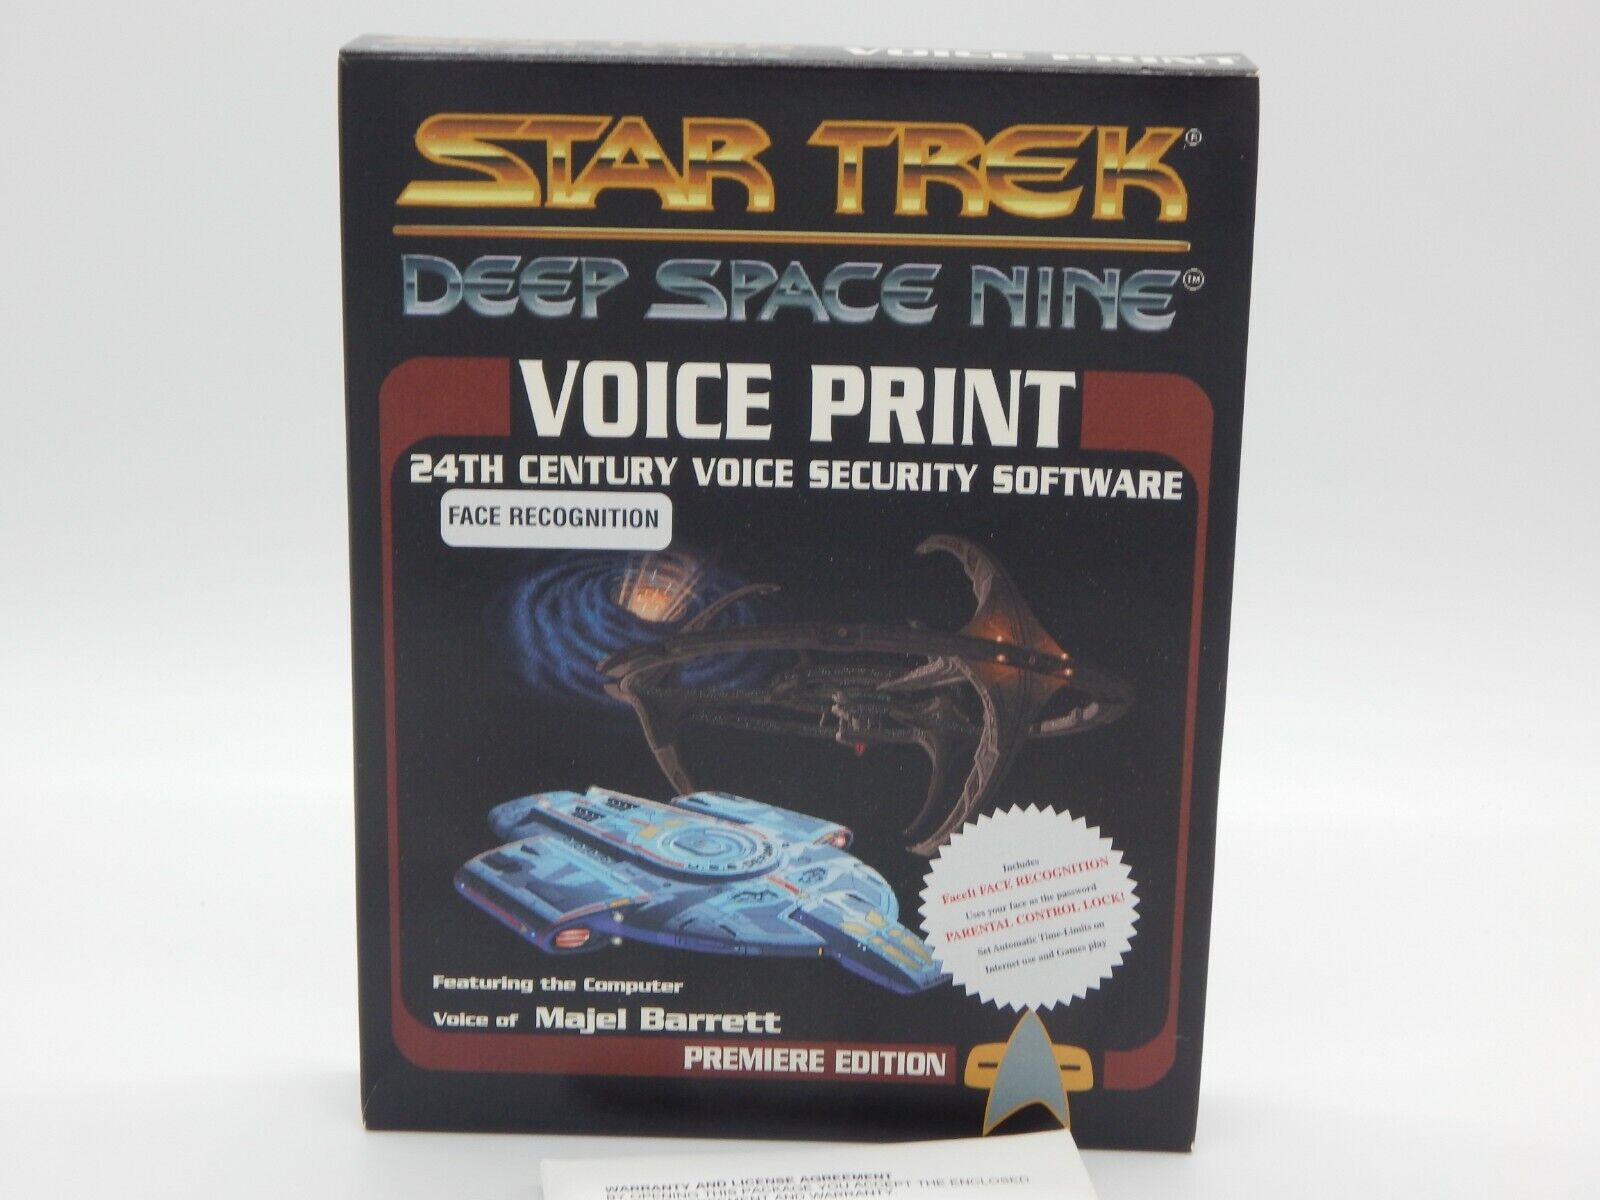 Star Trek Deep Space Nine Security Software Face Recognition PC Game Floppy Disc